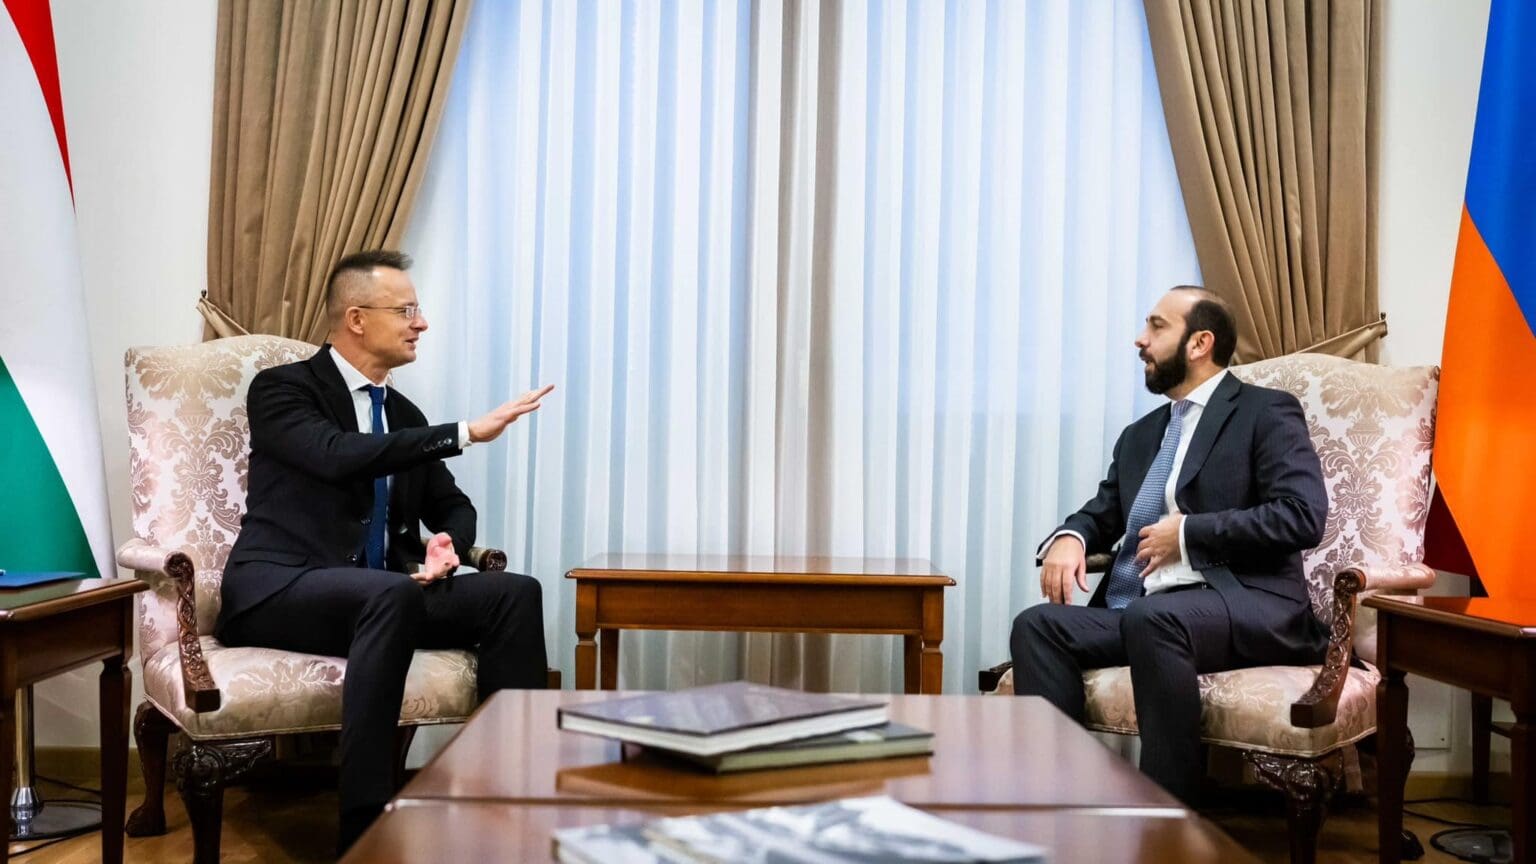 Hungary Remains Committed to Rebuilding Relations with Armenia